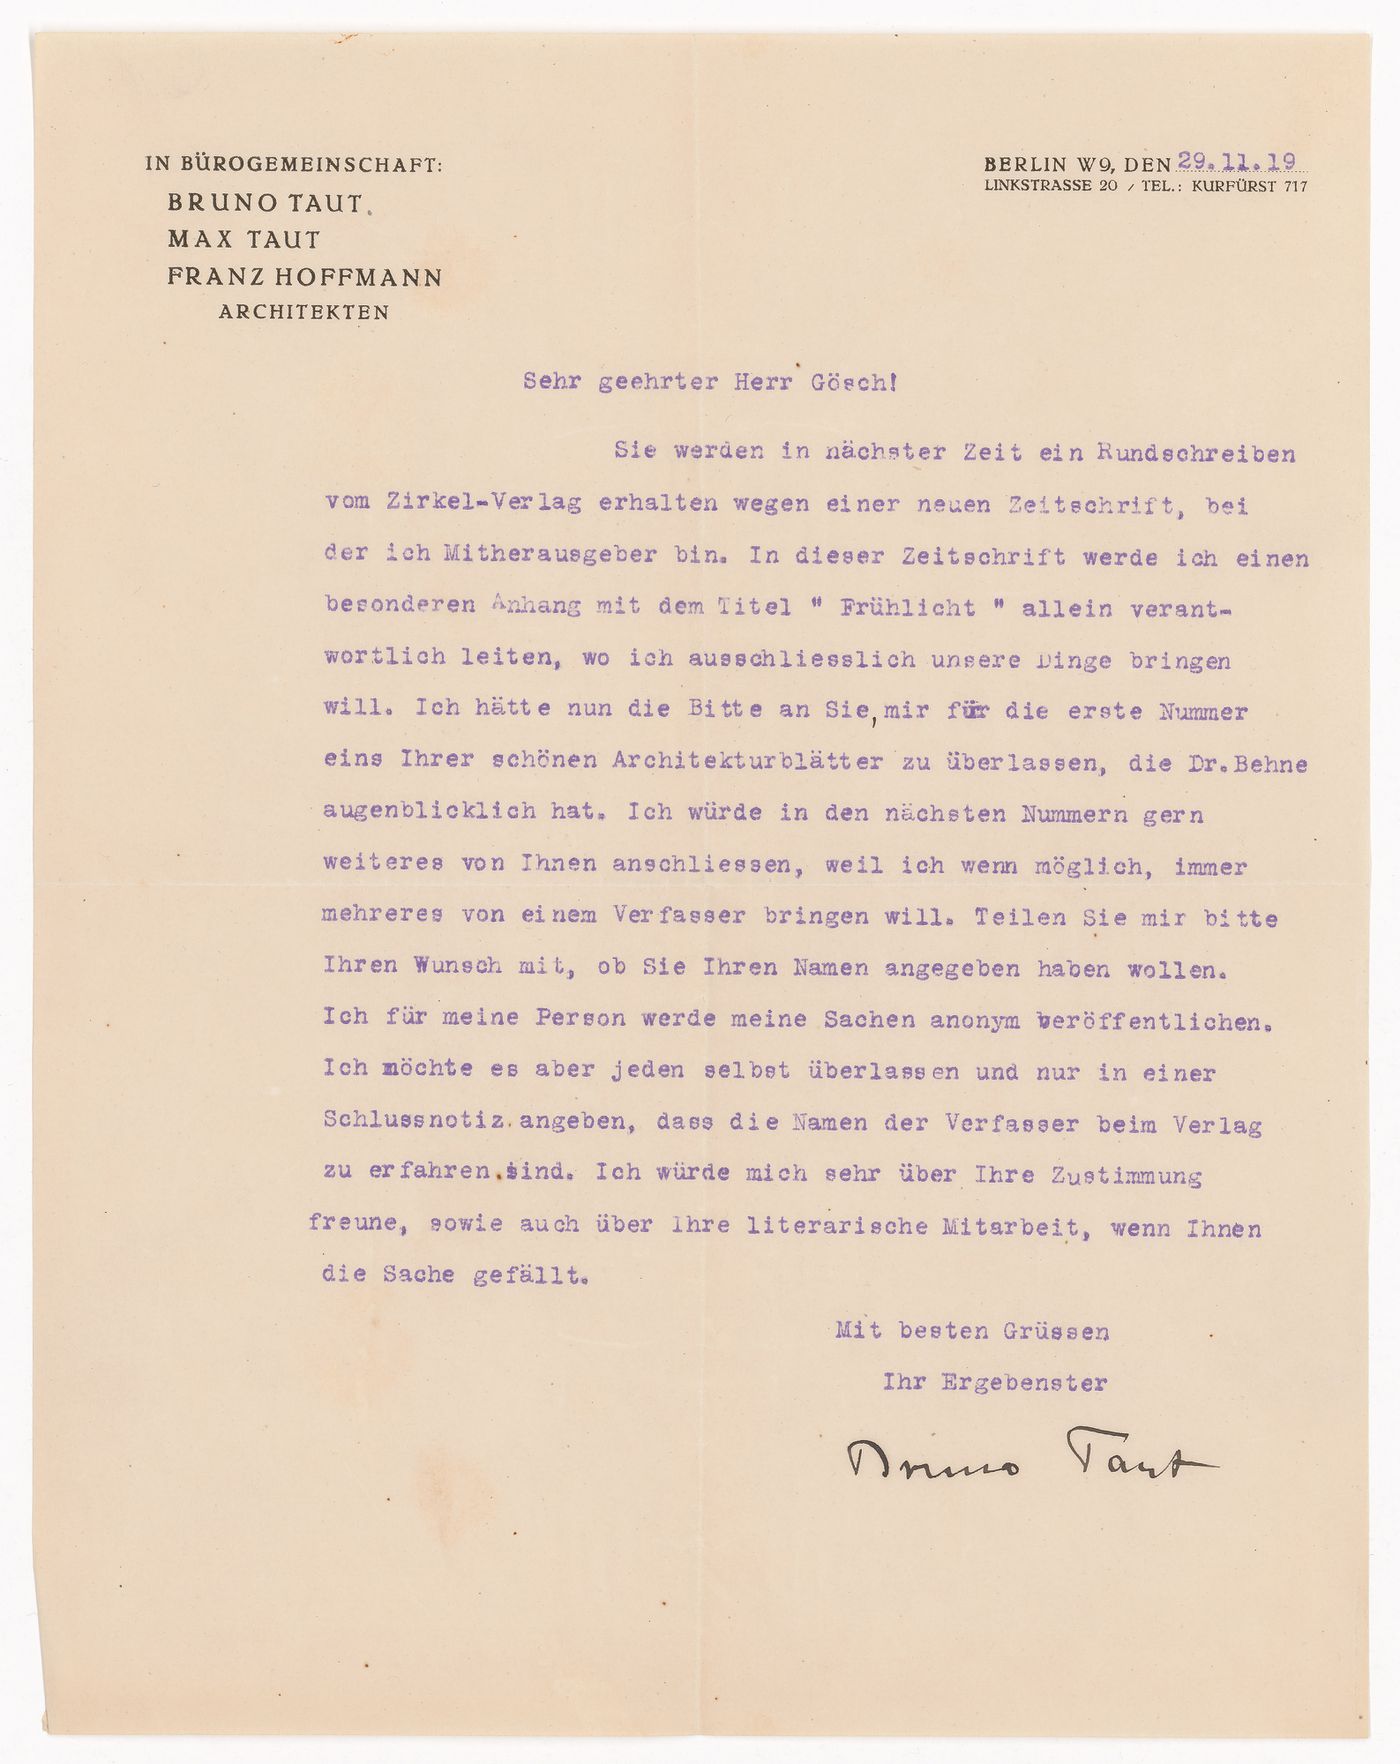 Letter from Bruno Taut to Herr Gösch, possibly Paul Goesch